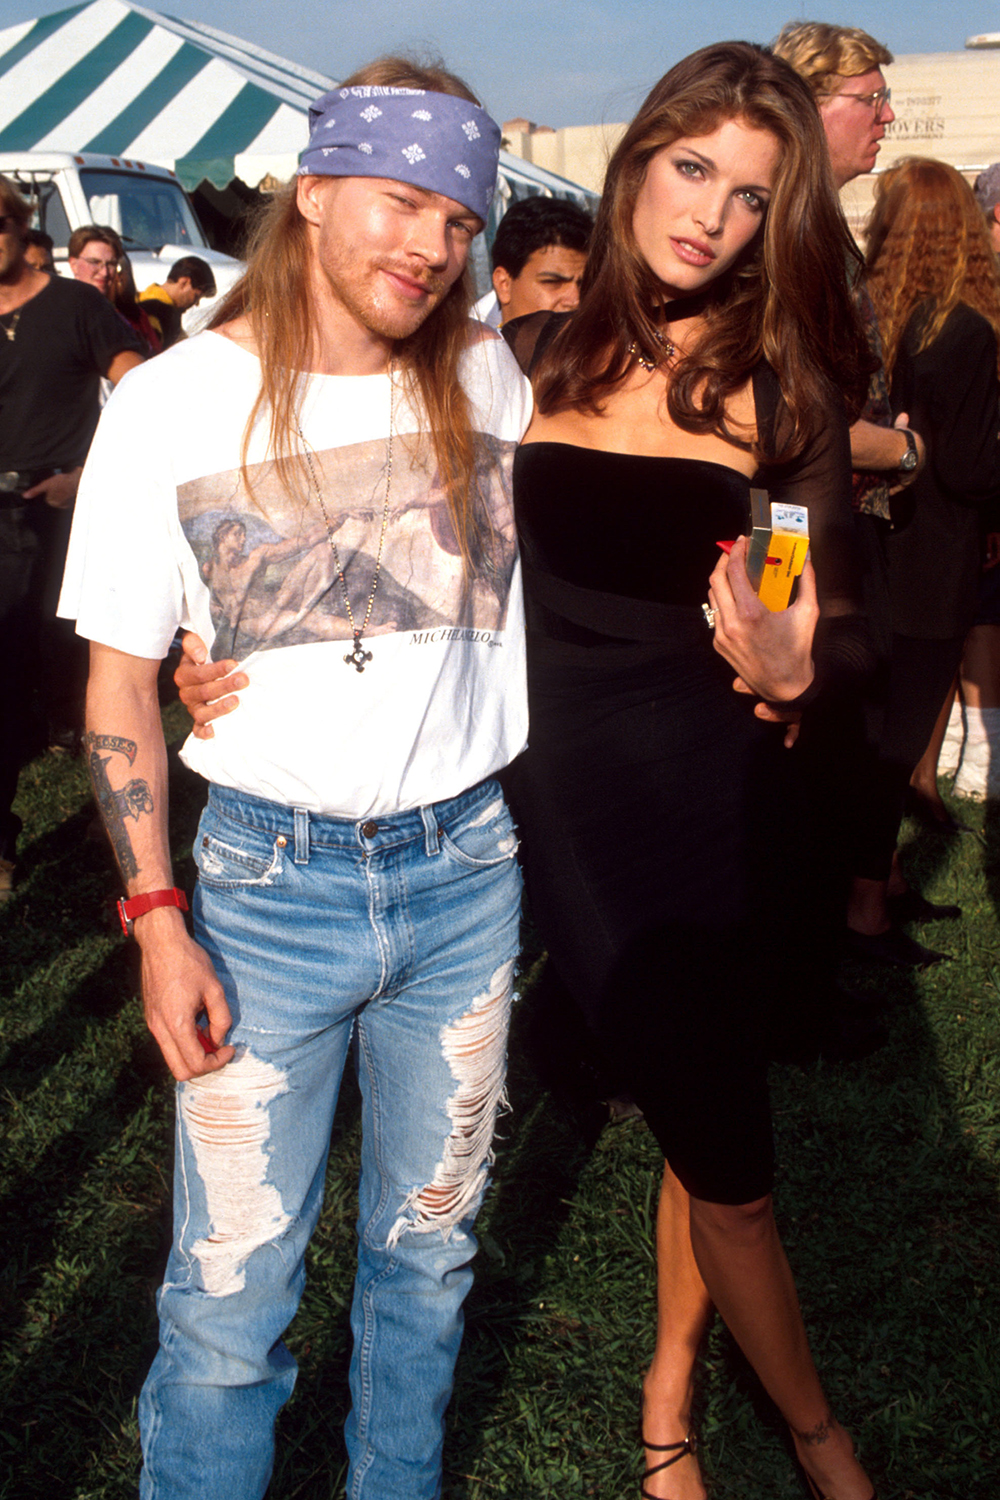 Stephanie Seymour dated Gun's N' Roses lead vocalist Axl Rose for two years in the 90s.